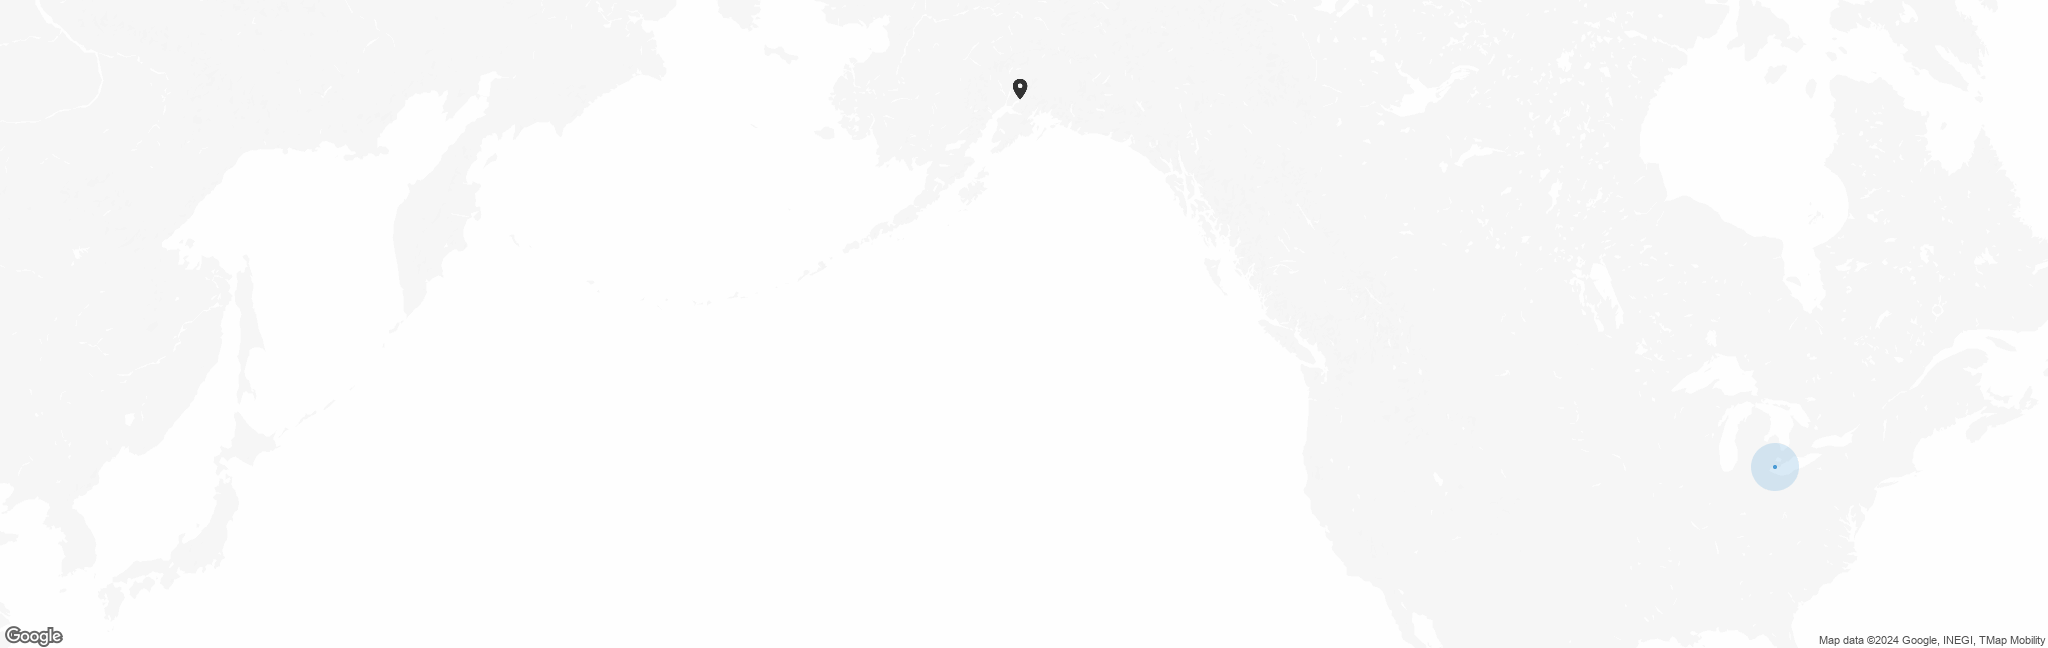 Map of US with pin of August Fund location